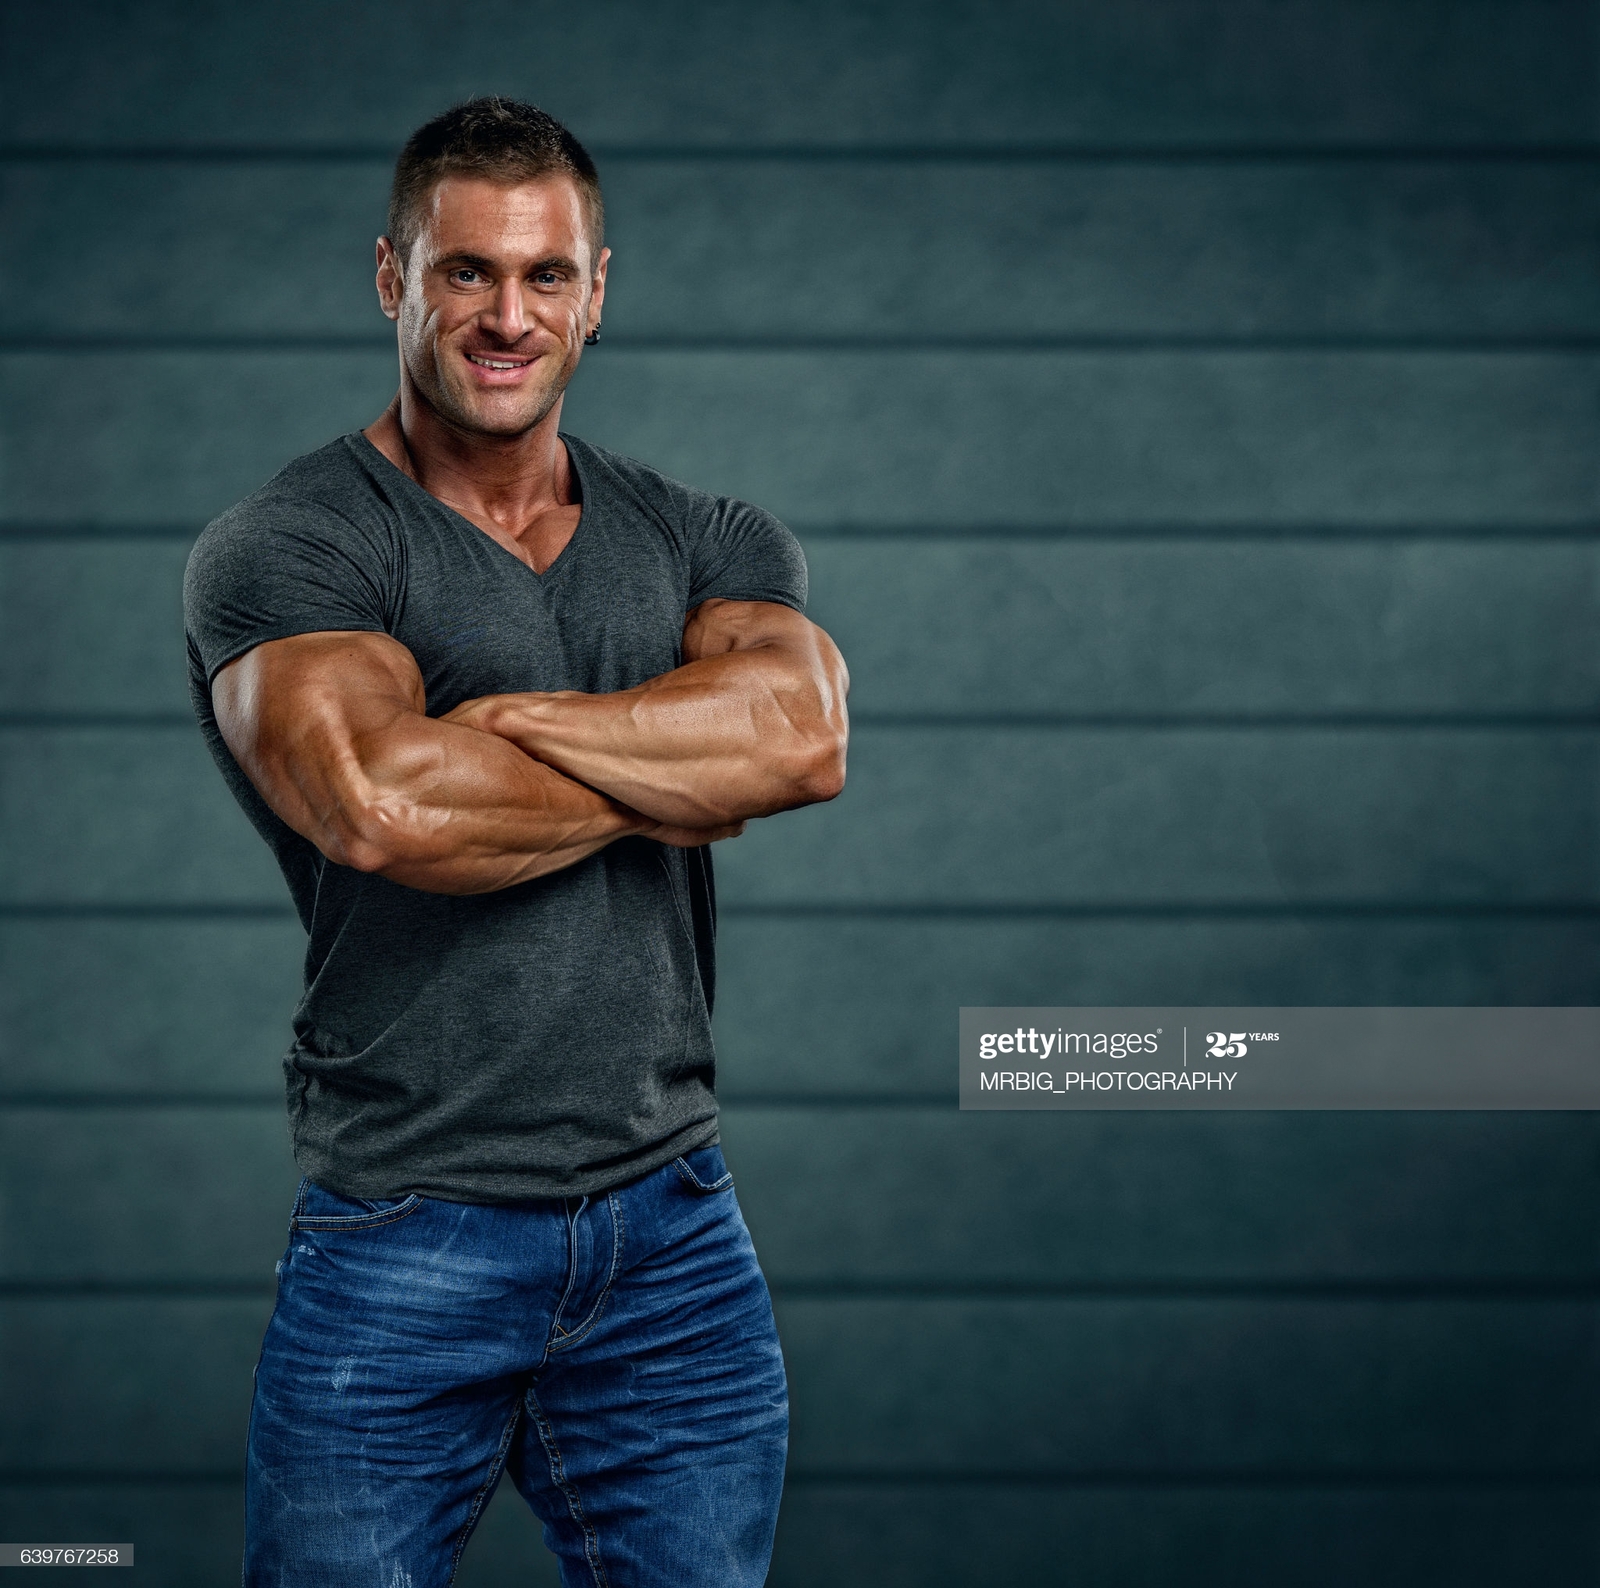 dsome-muscular-man-picture-id639767258?s=2048x2048.jpg